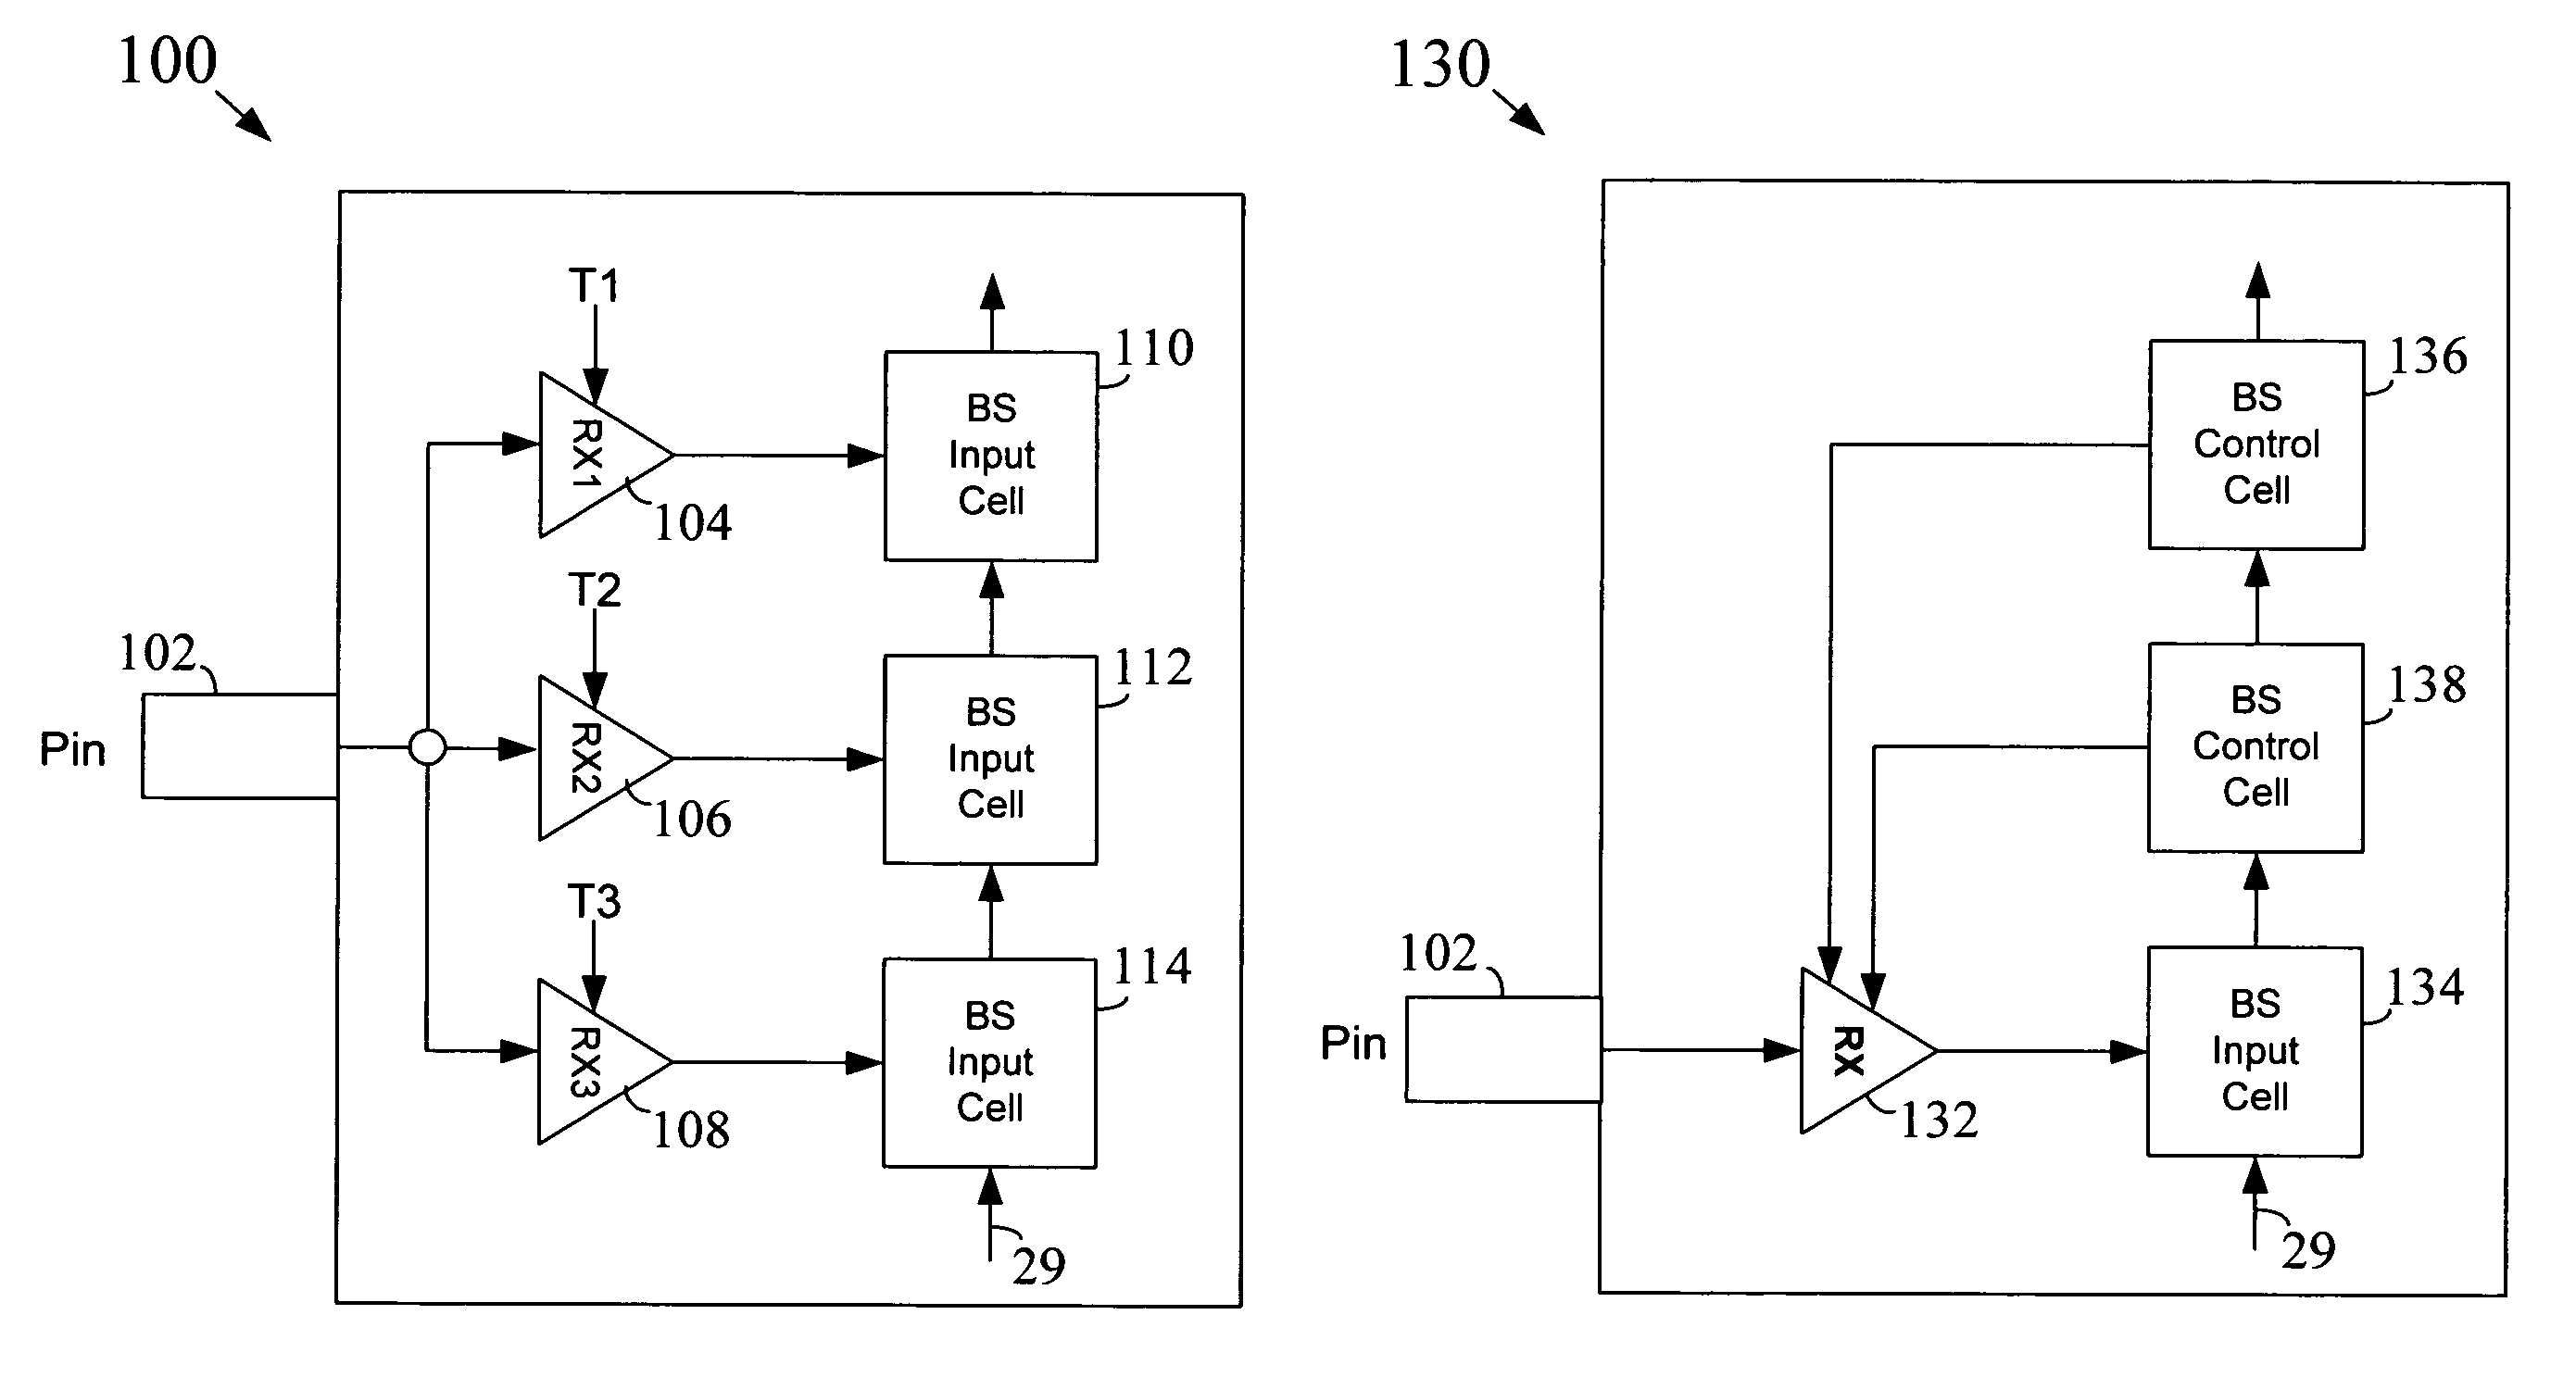 Apparatus for use in detecting circuit faults during boundary scan testing